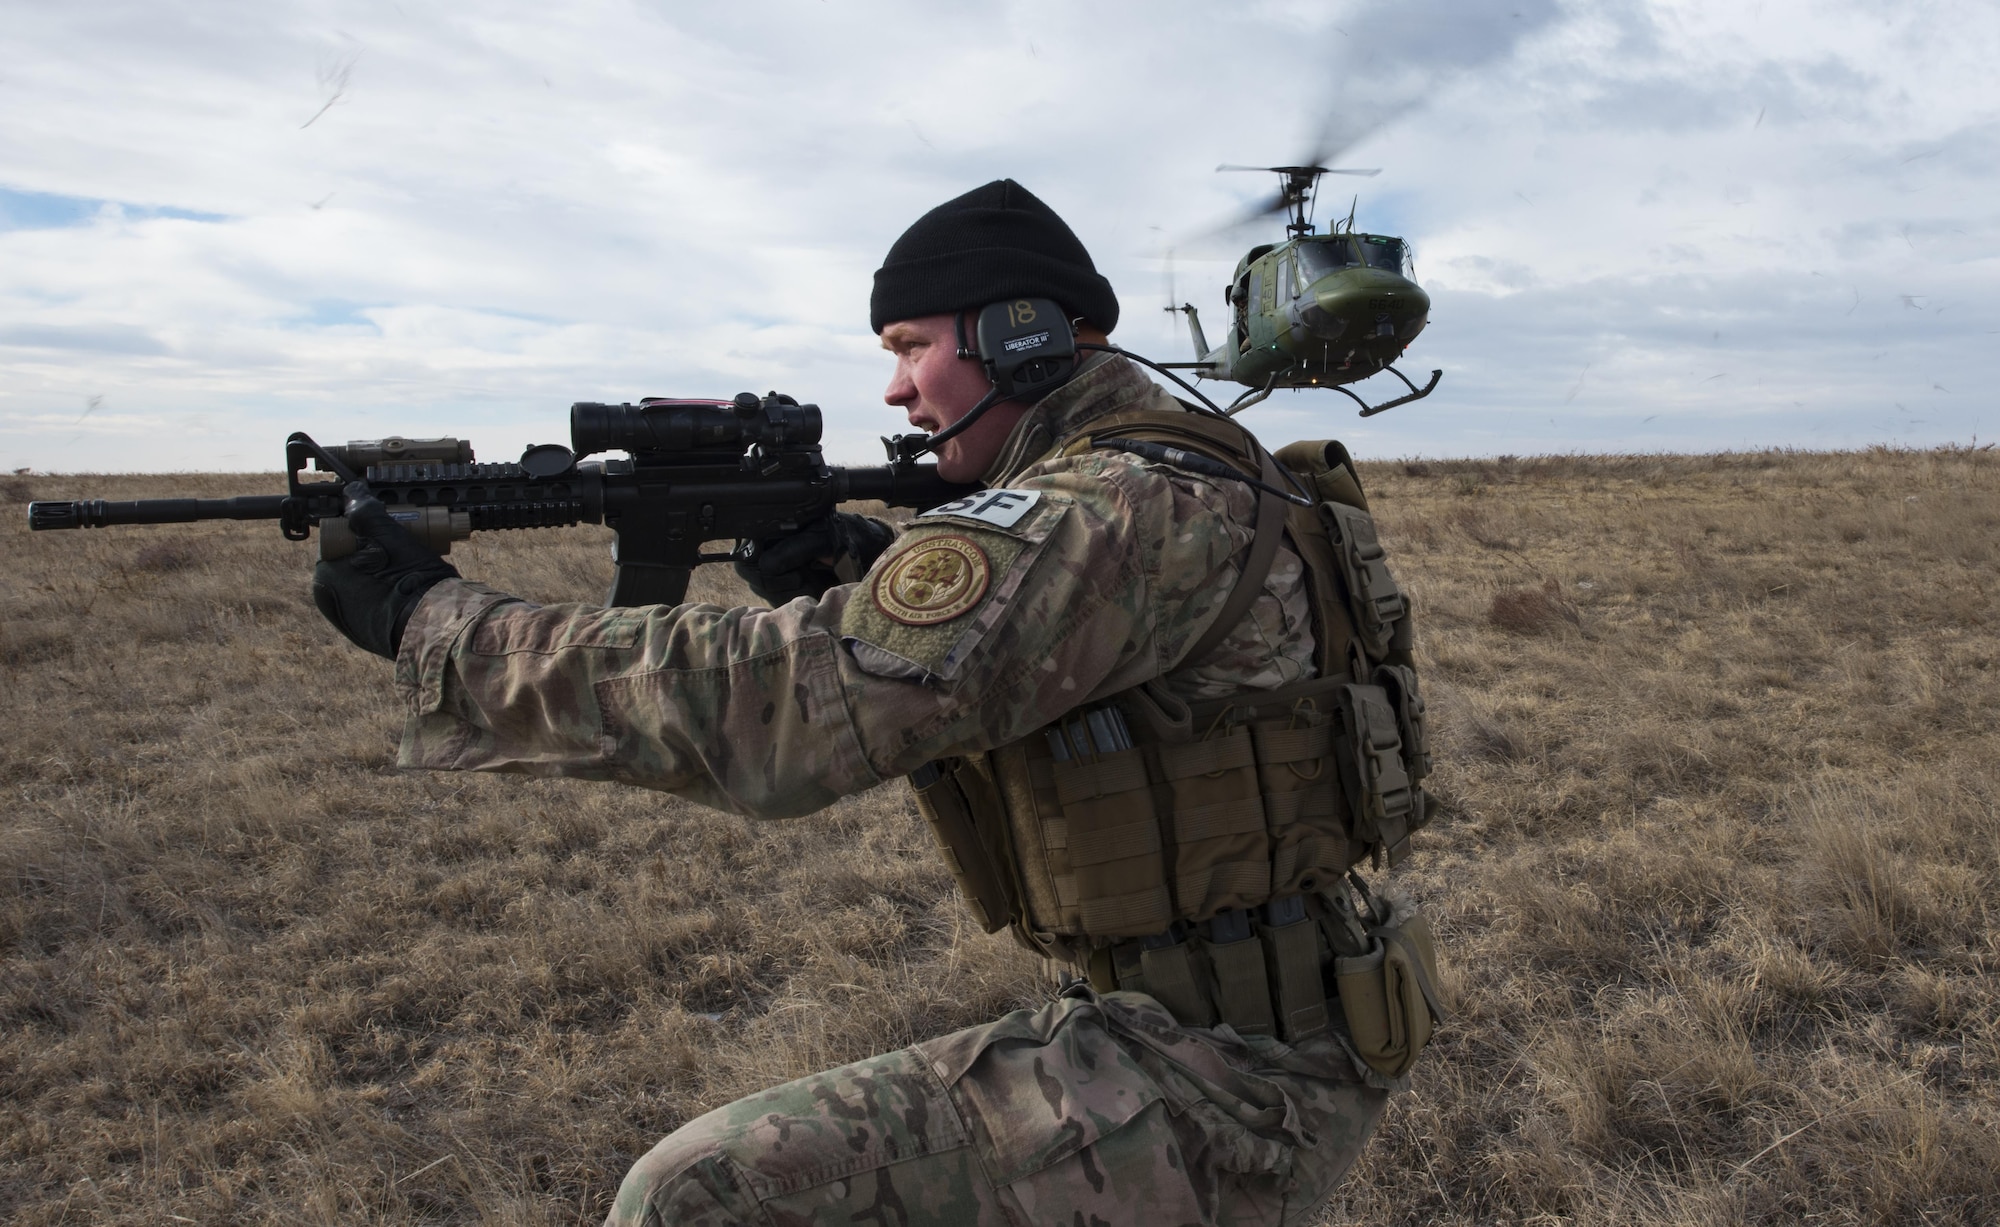 Senior Airman Joshua Hudson, 790th Missile Security Forces Squadron tactical response force assaulter, secures a landing site during emergency security response training with the 37th Helicopter Squadron at a launch facility in the F.E. Warren Air Force Base, Wyo., missile complex, Dec. 16, 2016. The 37th HS supports the mission of the 90th Missile Wing by providing aerial surveillance and emergency deployments of security response forces throughout the base and missile field. (U.S. Air Force photo by Staff Sgt. Christopher Ruano)